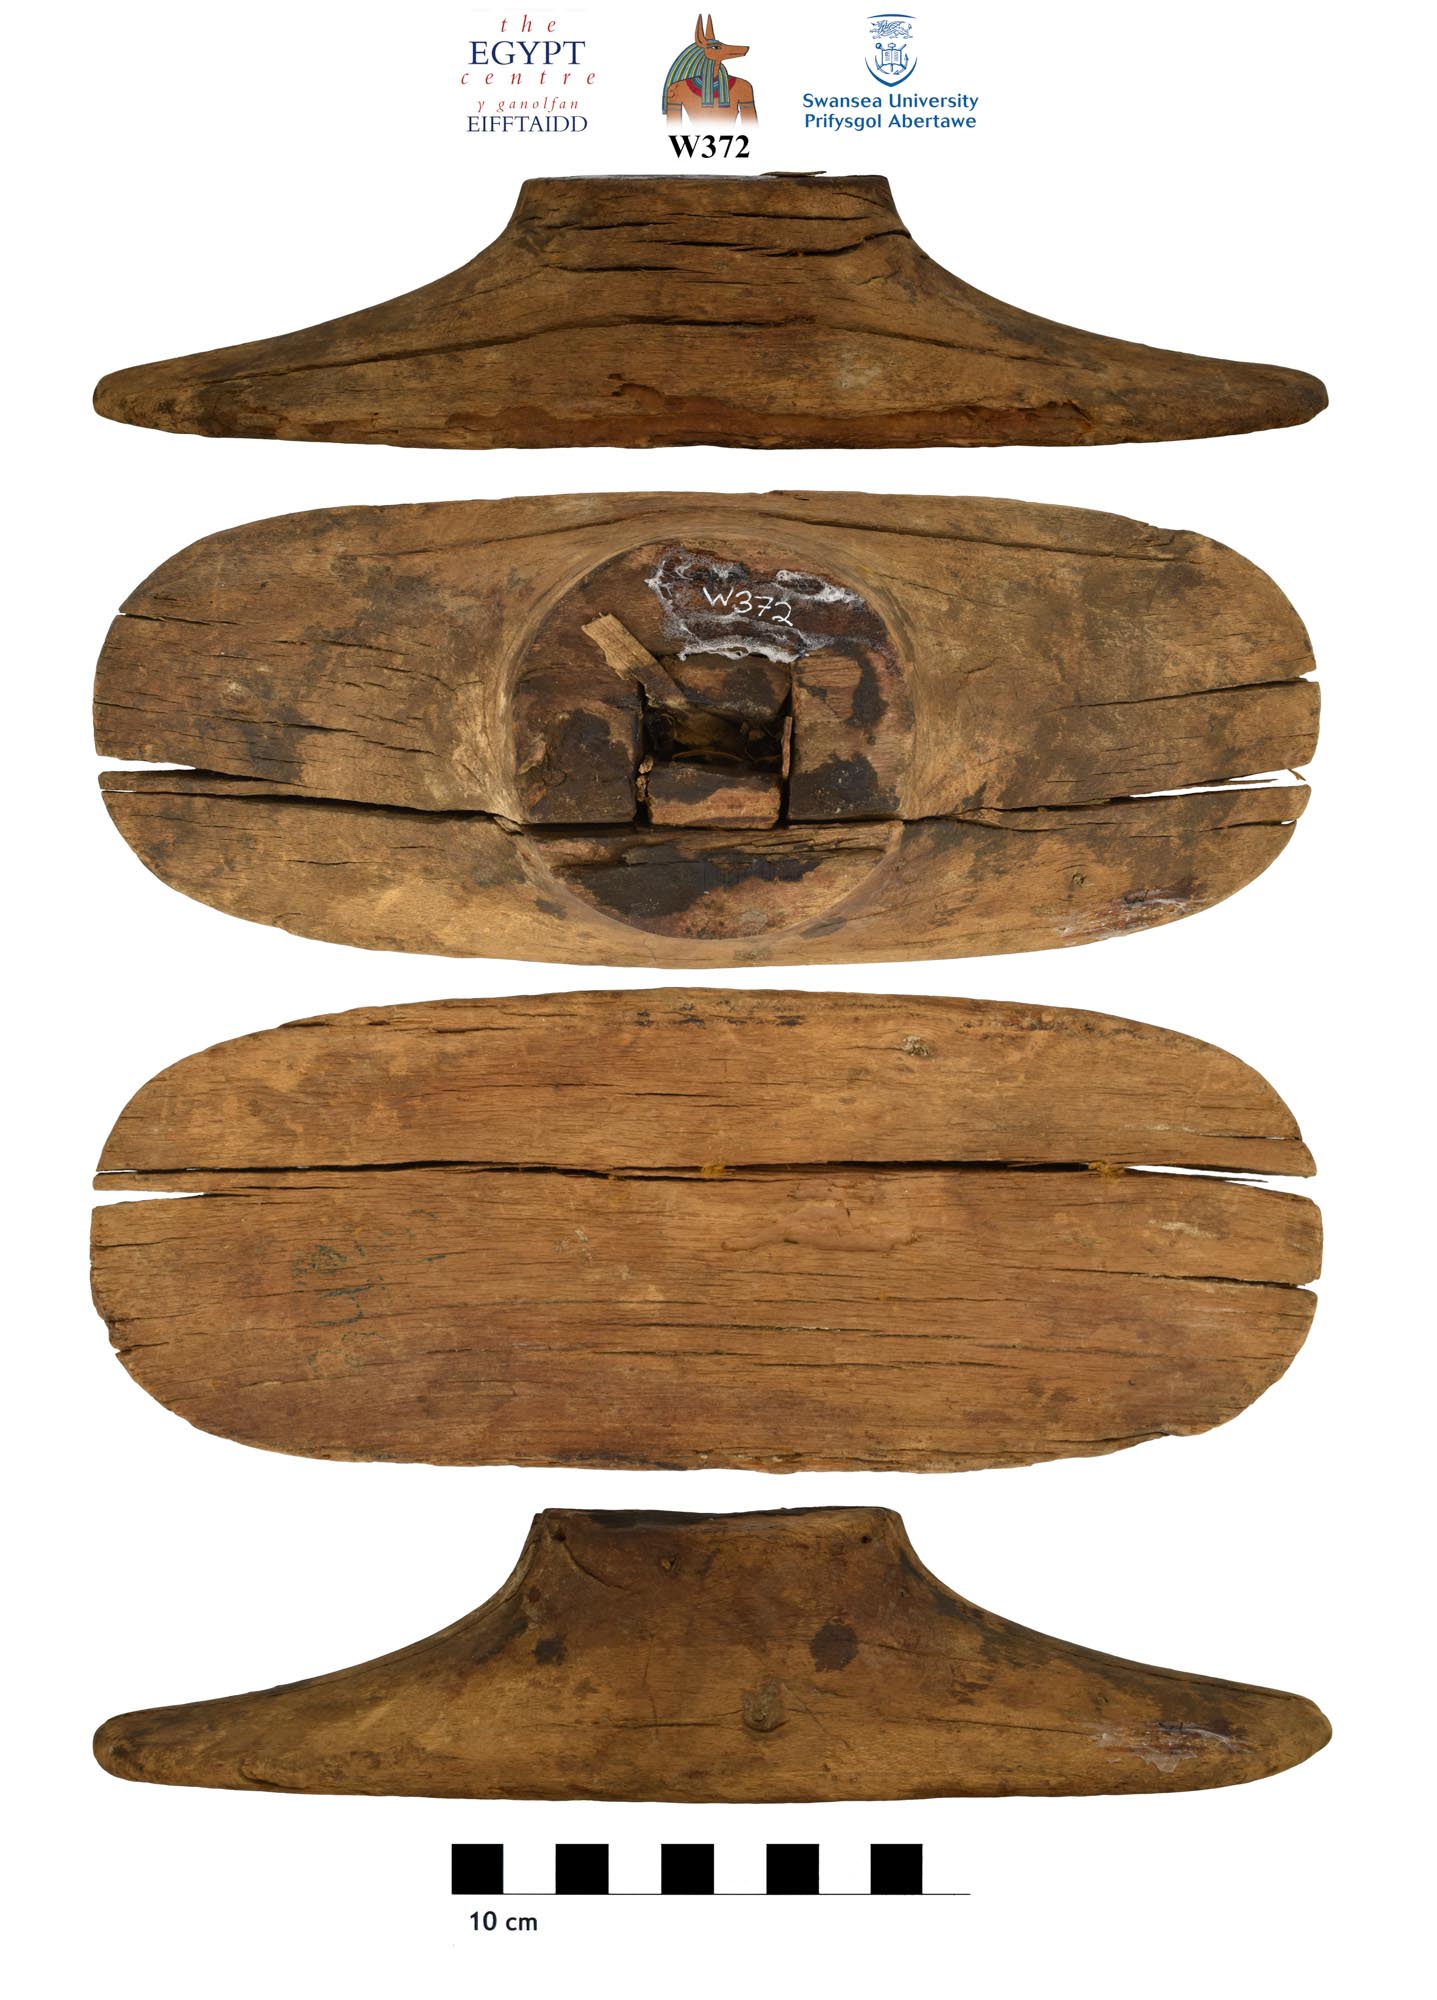 Image for: Top section of a wooden headrest